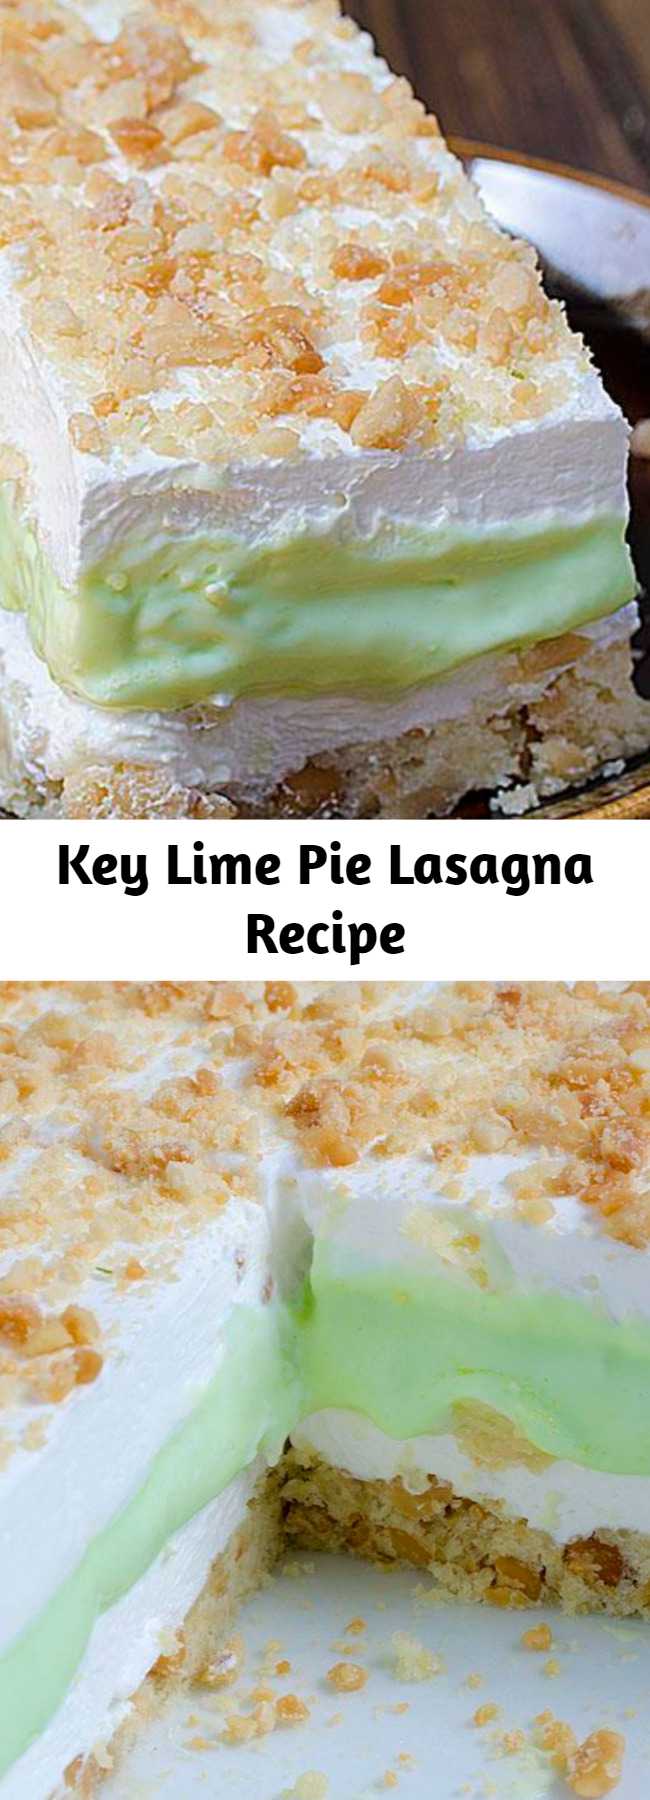 Key Lime Pie Lasagna Recipe - Key Lime Pie Lasagna is cool, light and creamy summer dessert with sweet and tart layers of yumminess.